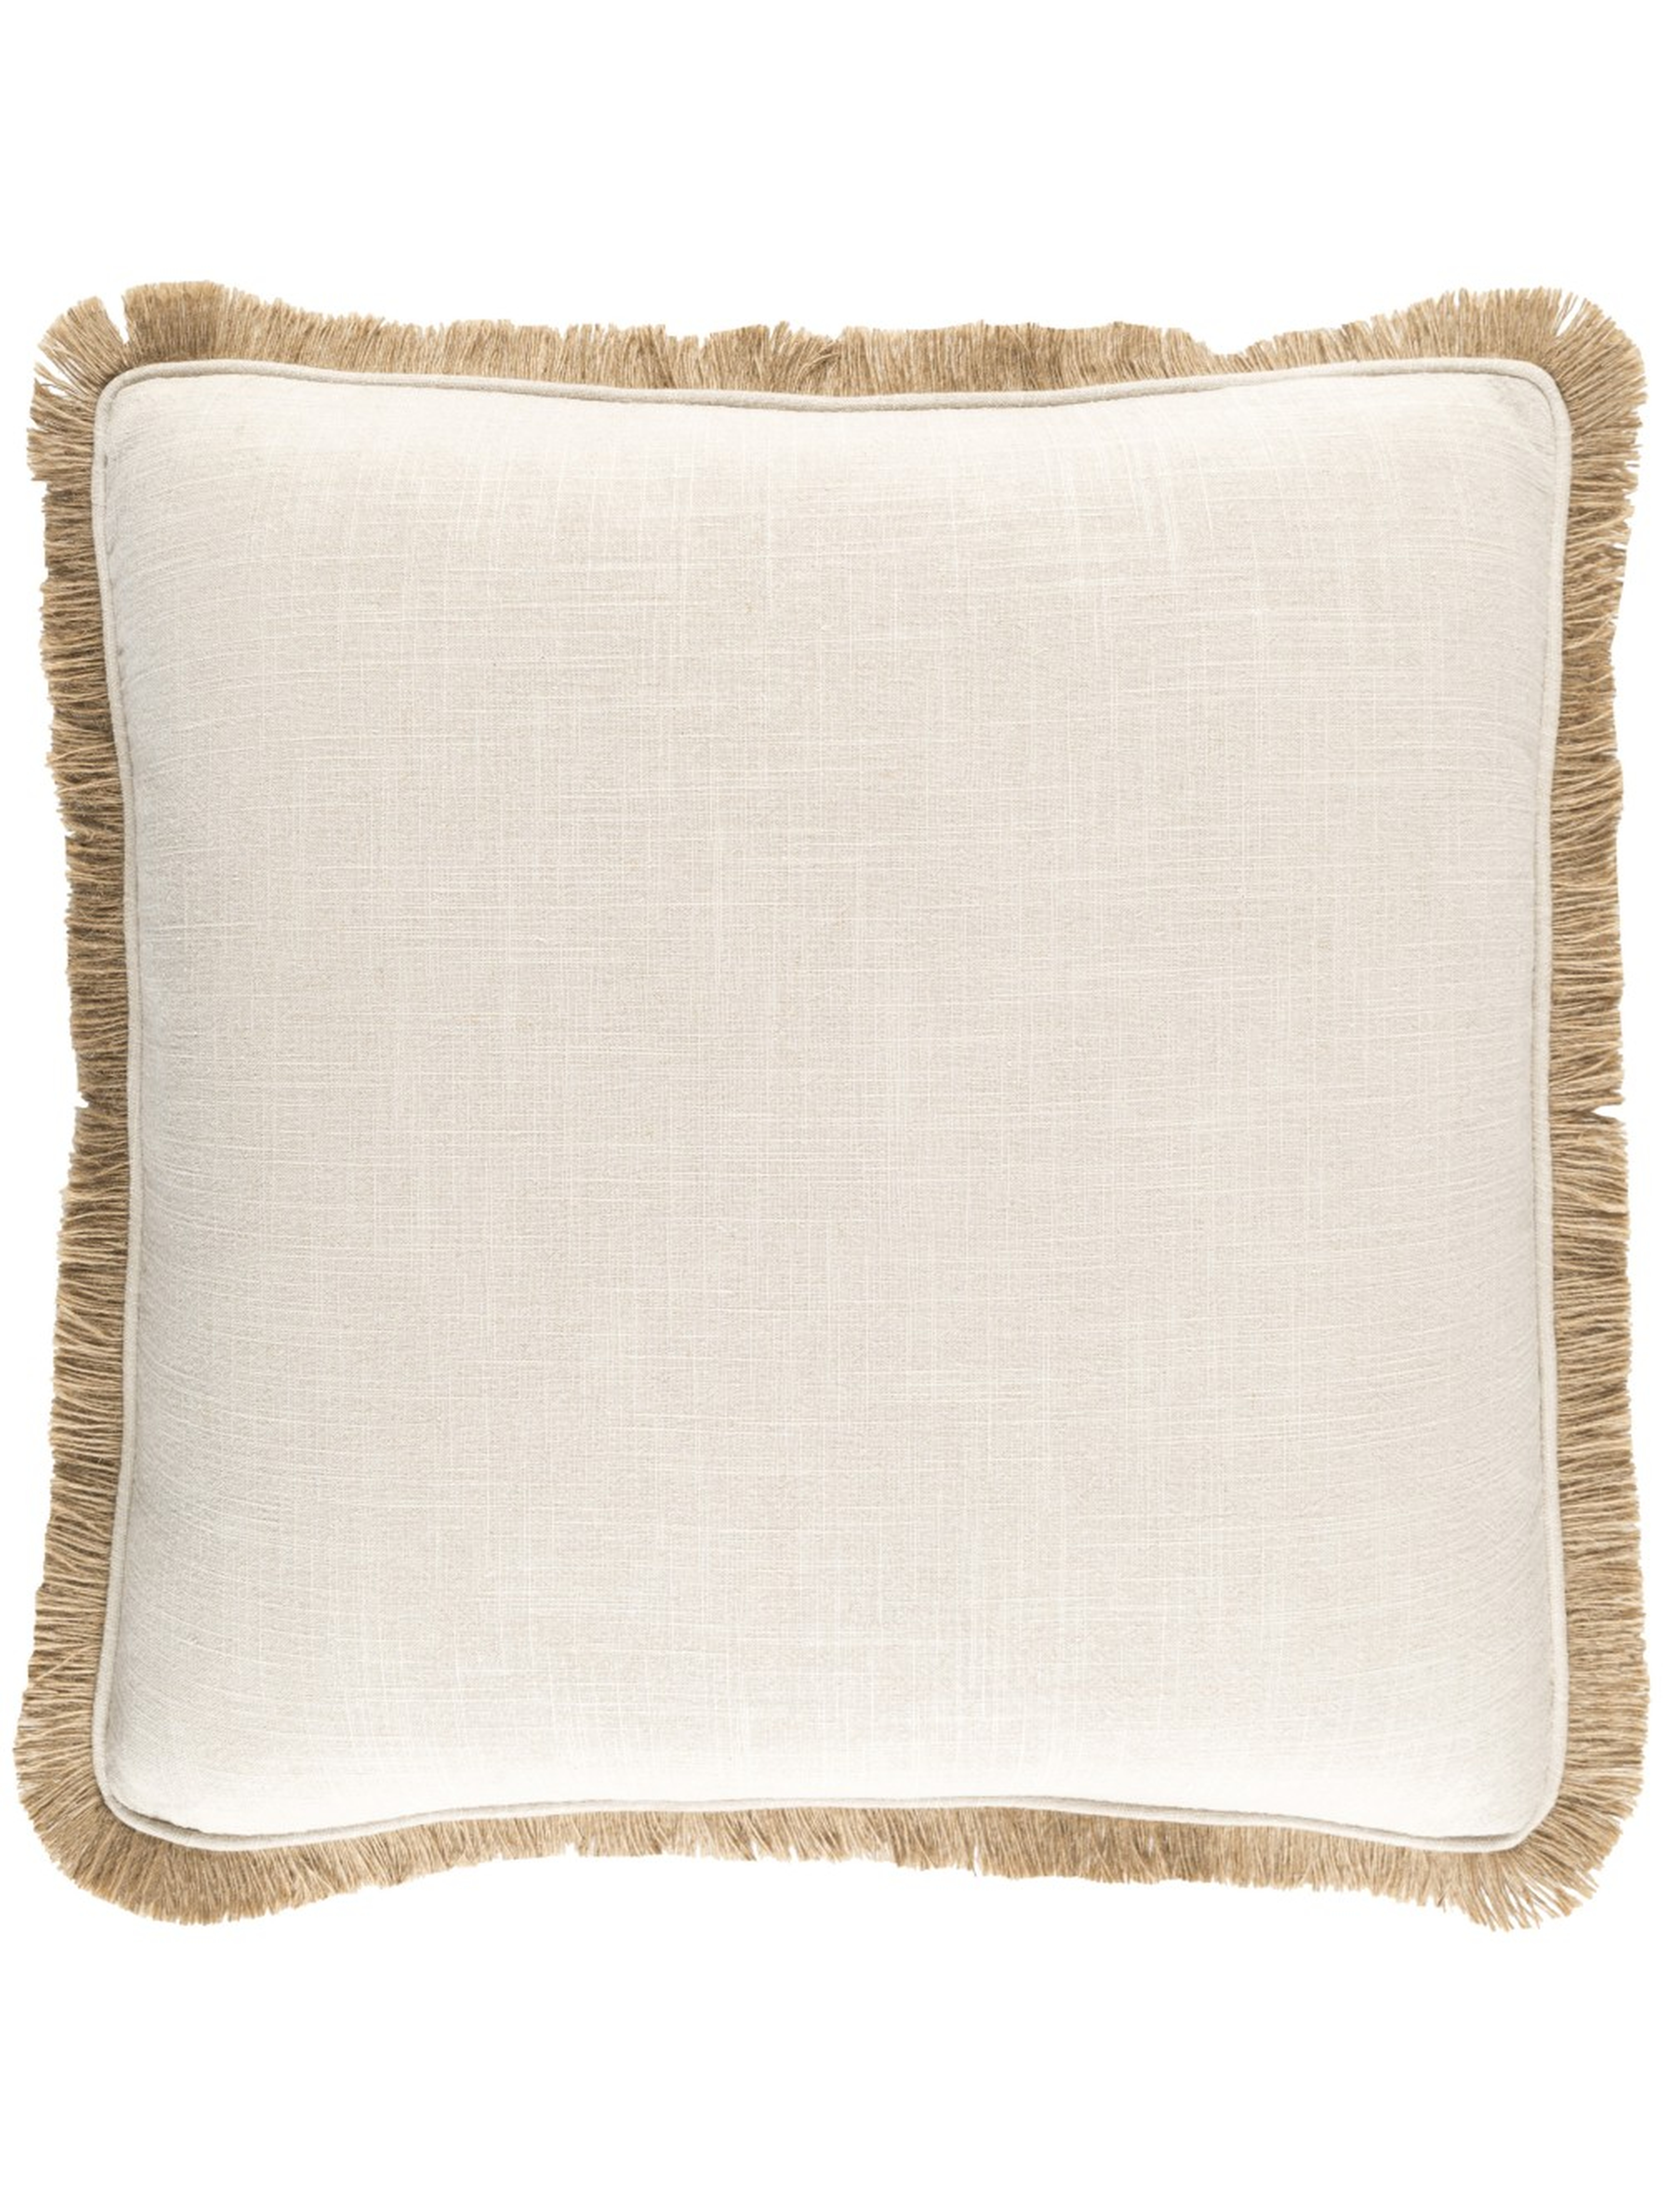 GUIDA PILLOW, IVORY - 20x20 - Poly filled - Lulu and Georgia